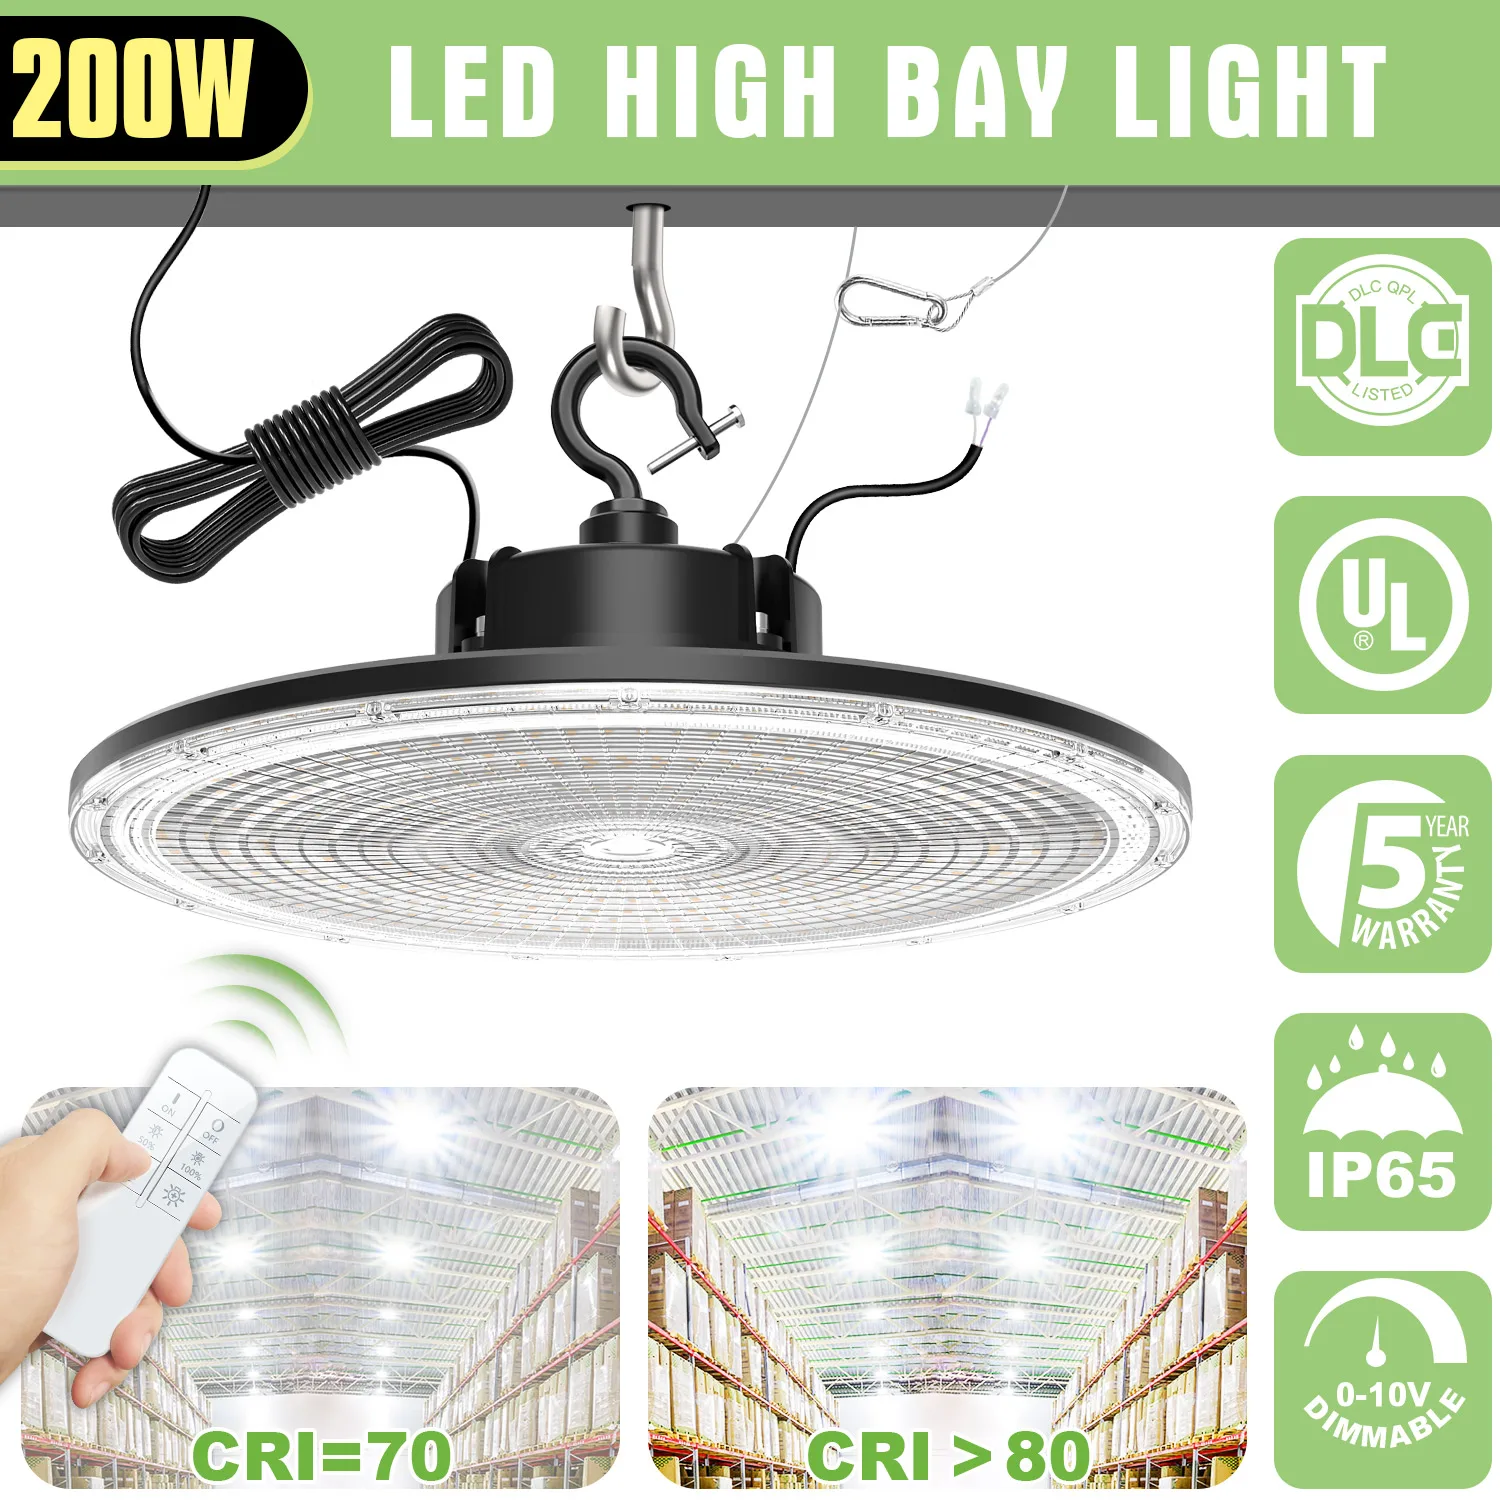 

Ngtlight LED High Bay Light 100W 150W 200W 240W Dimmable IP65 5 Years Warranty AC100-277V Industrial Lighting Warehouse UFO Lamp